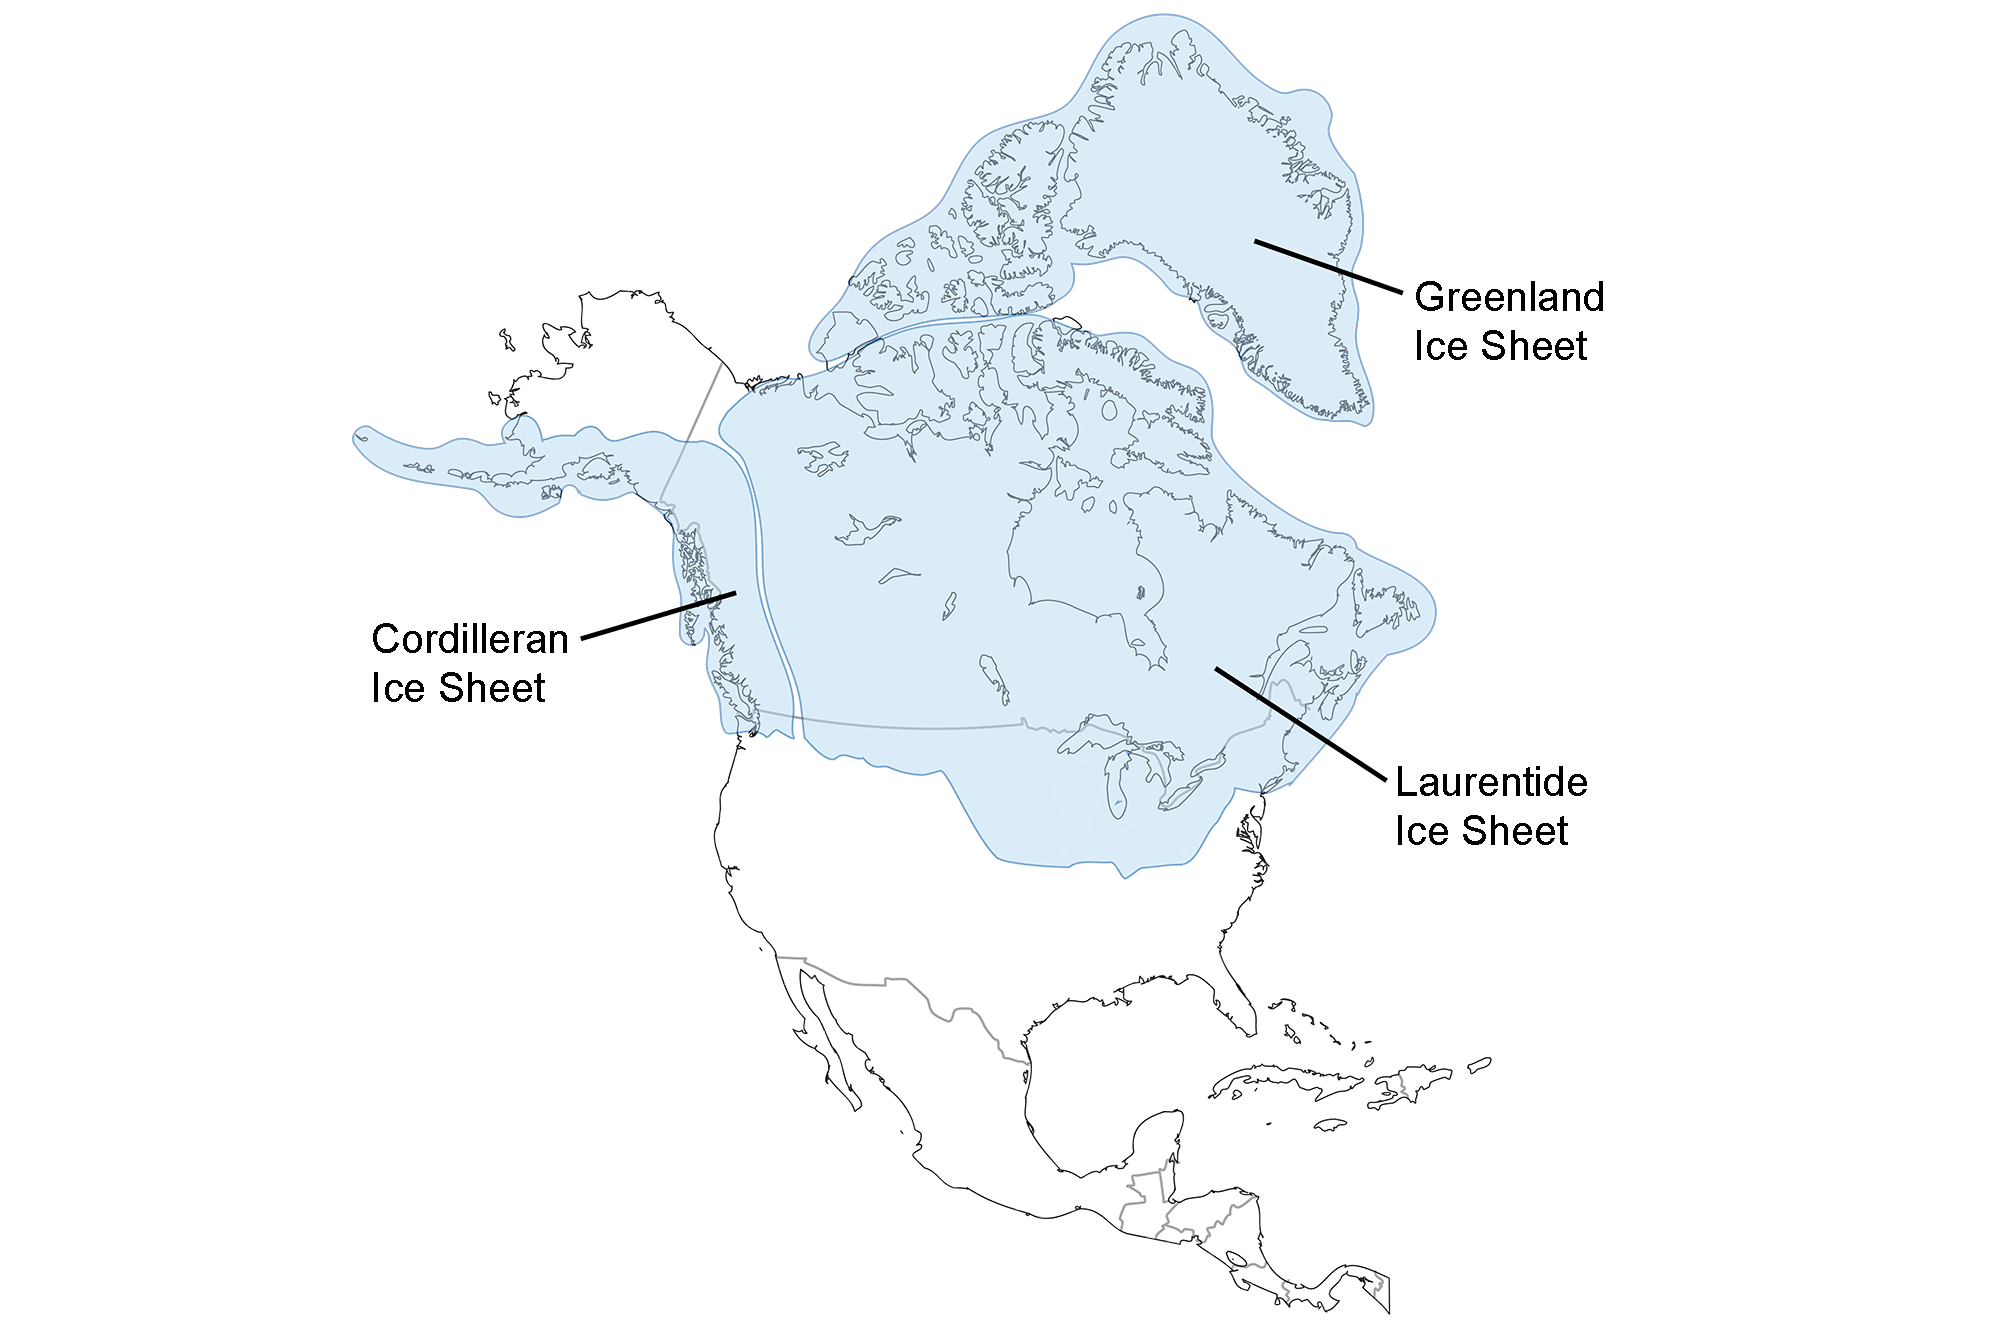 Map showing the positions of major North American ice sheets during the Last Glacial Maximum.